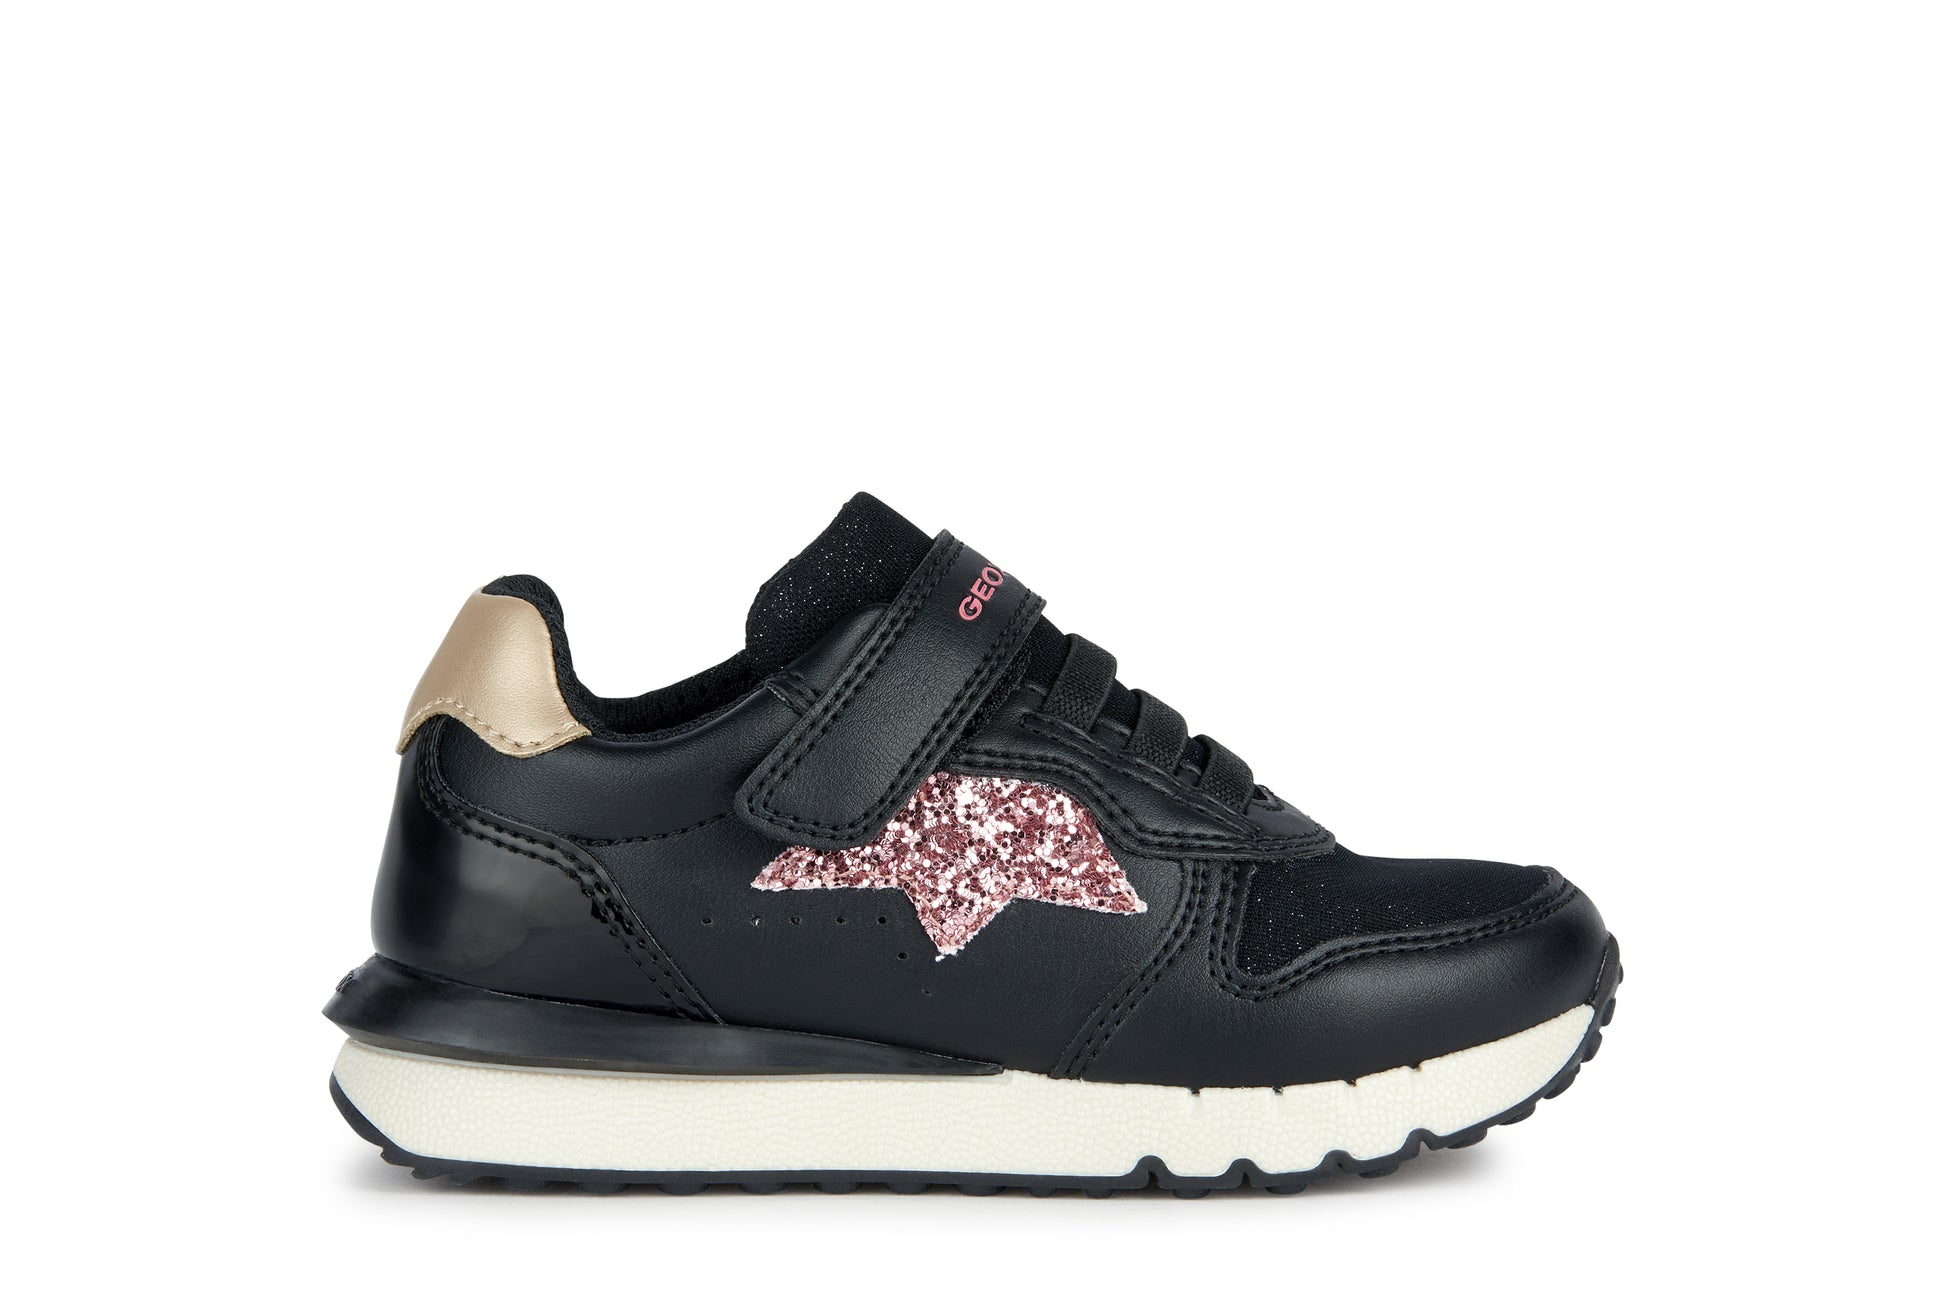 A girls casual trainer by Geox, style J Fasics Girl, in Black and Pink Glitter with elastic laces and single velcro fastening. Right side view. 